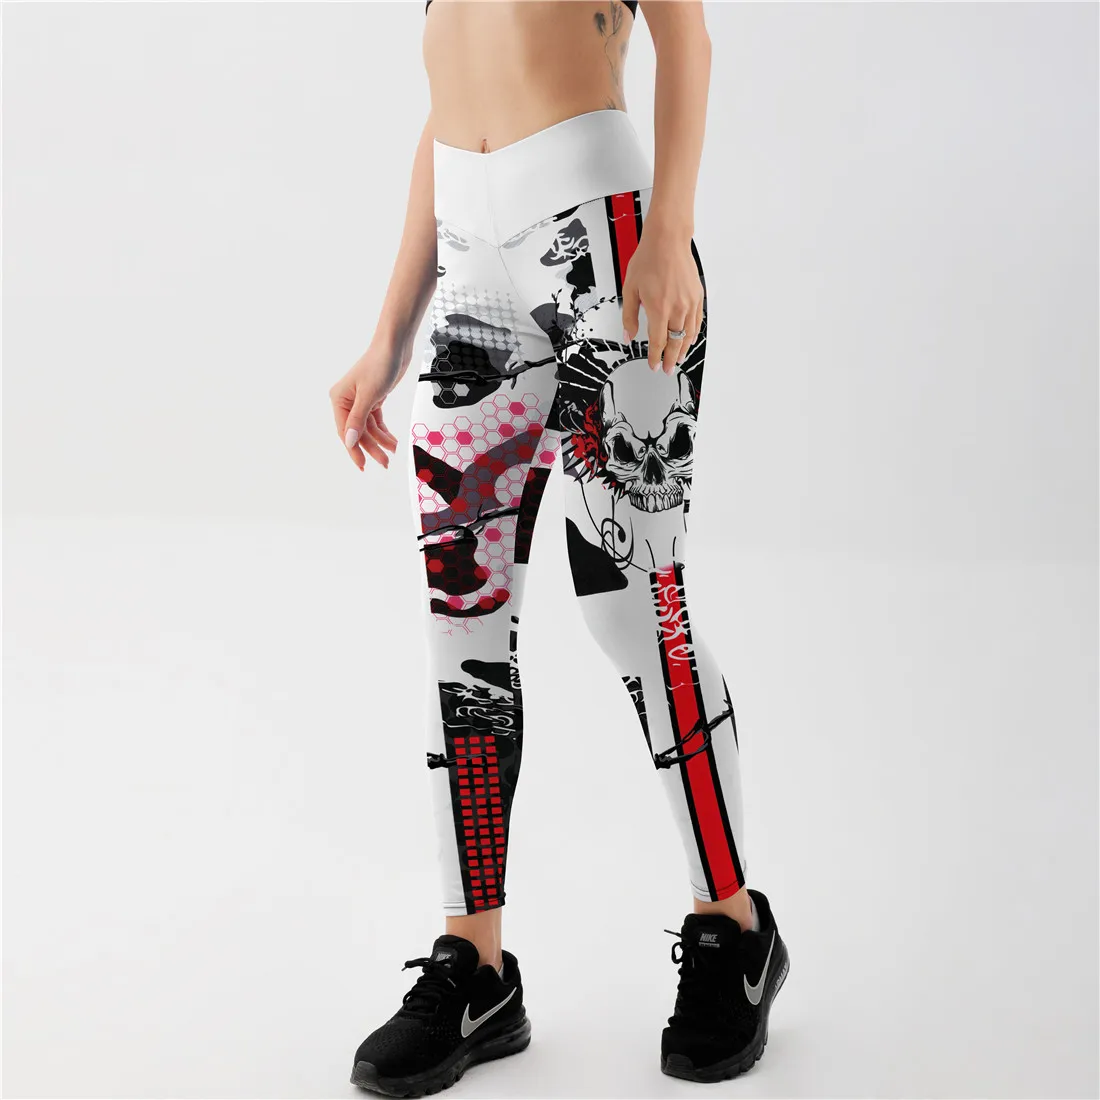 

20 styles So Cute !!Dark & cat and Leopard print God Horse Mummy Dog Skull colorful Heart Printed leggings women's sexy Pants